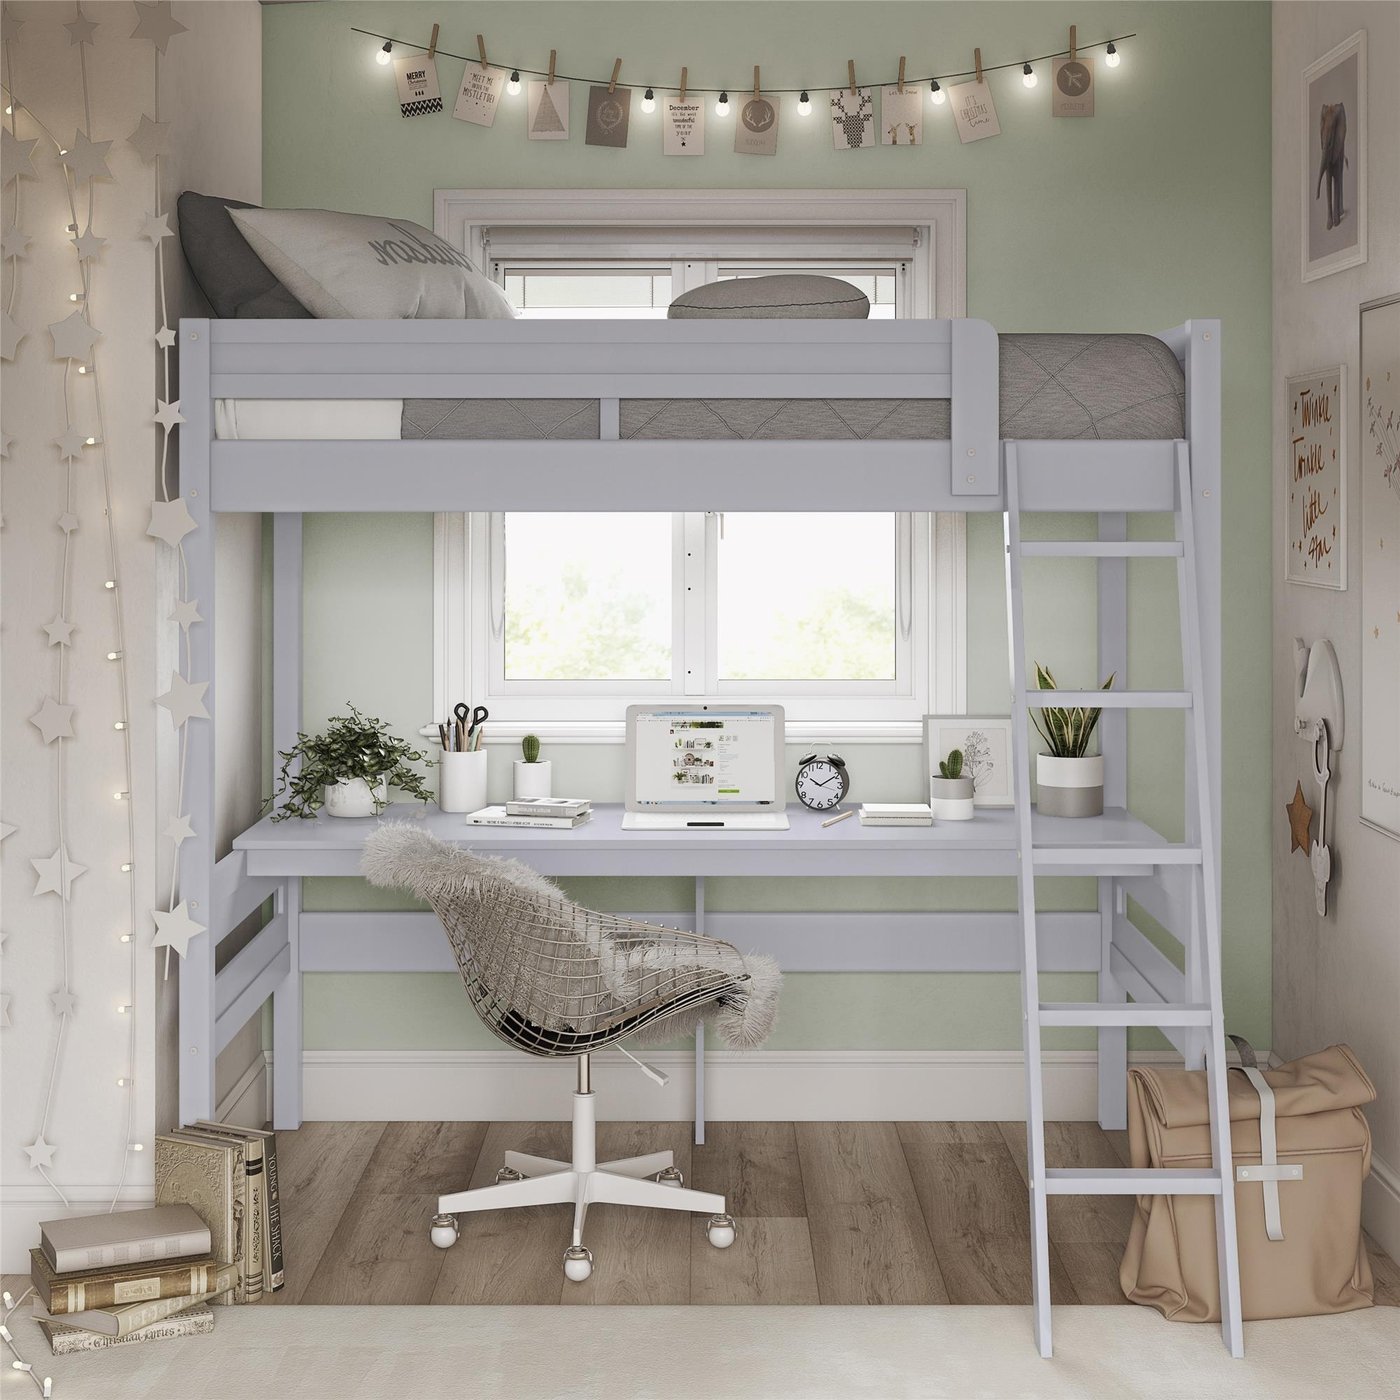 6 Reasons To Get A Loft Bed For A Small Space - VisualHunt